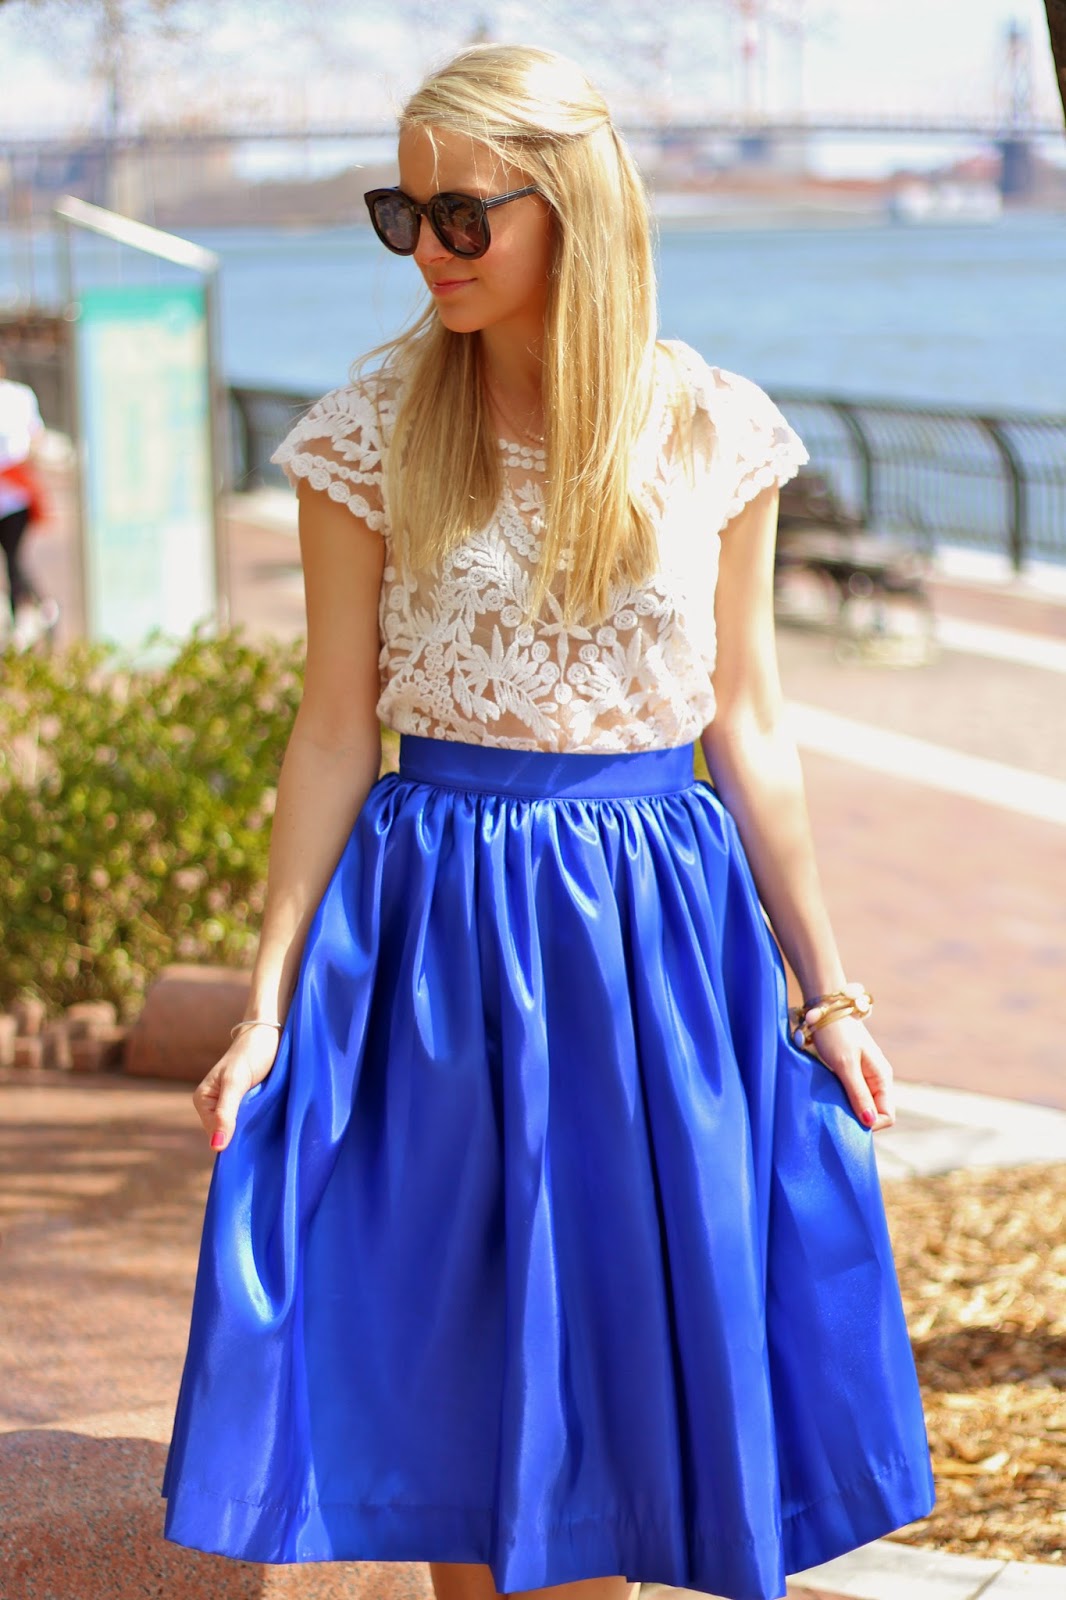 LACE, BLUE + BAUBLES - Styled Snapshots